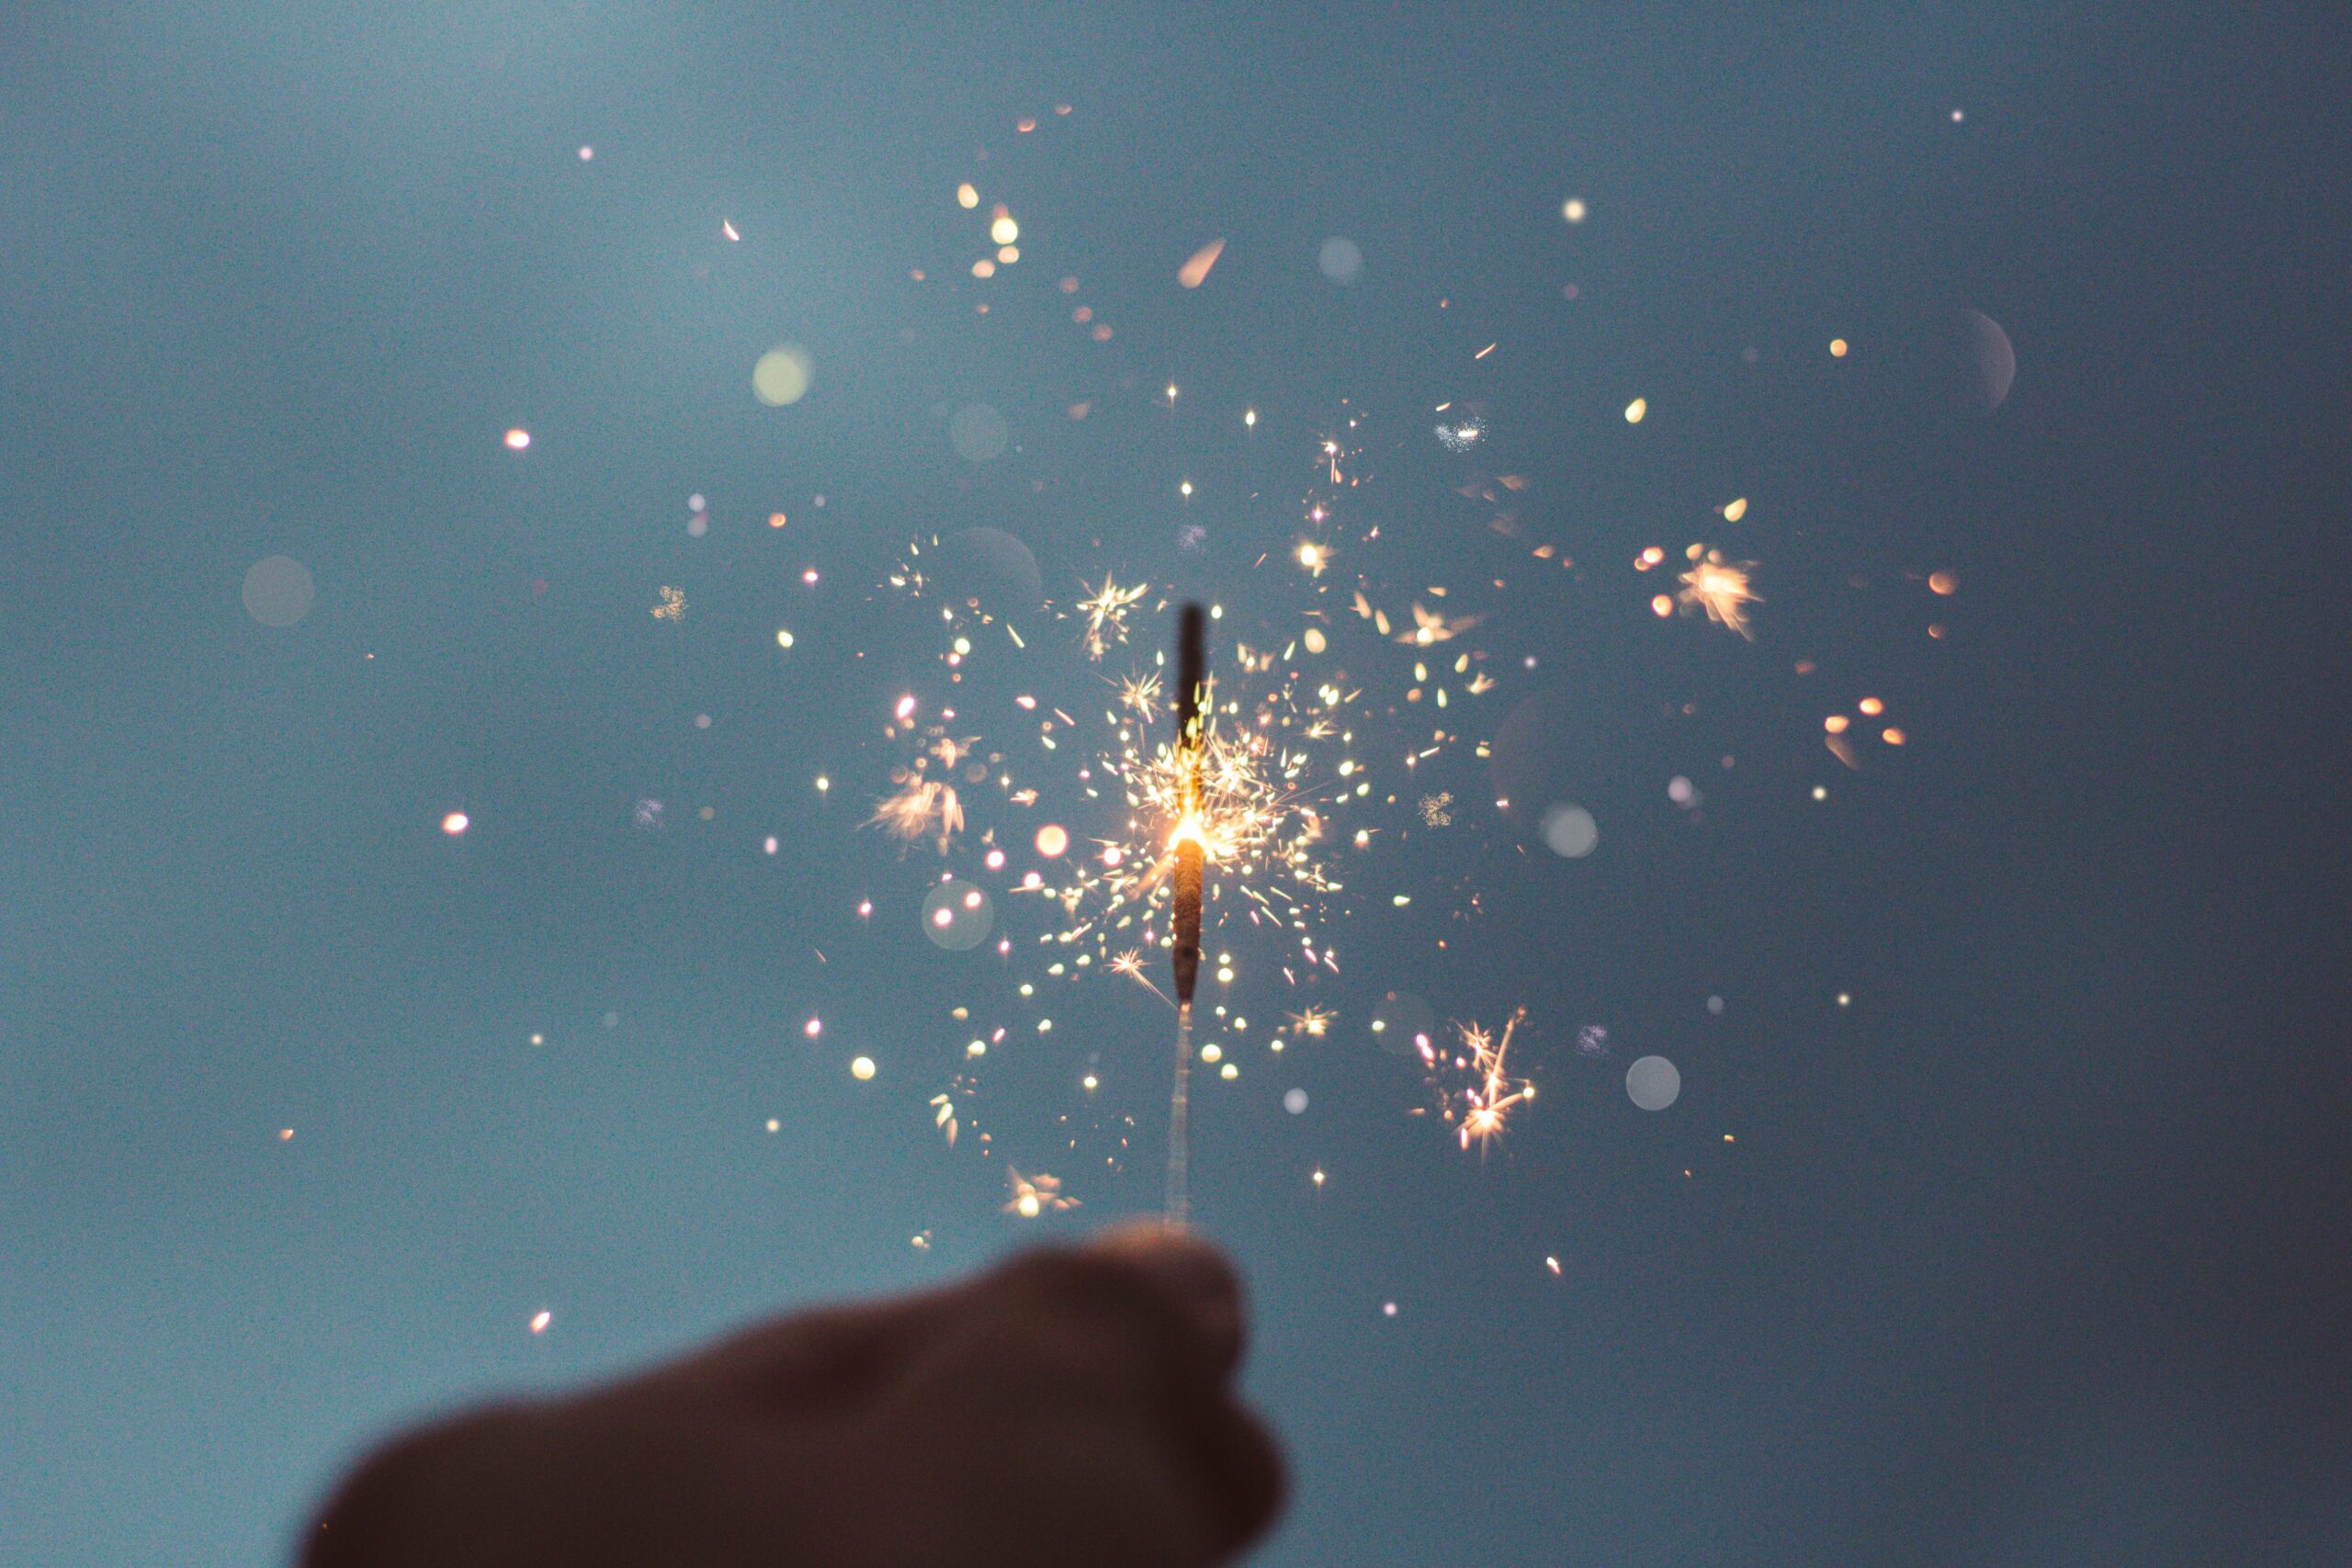 Hand holding a sparkler against a cloudy background